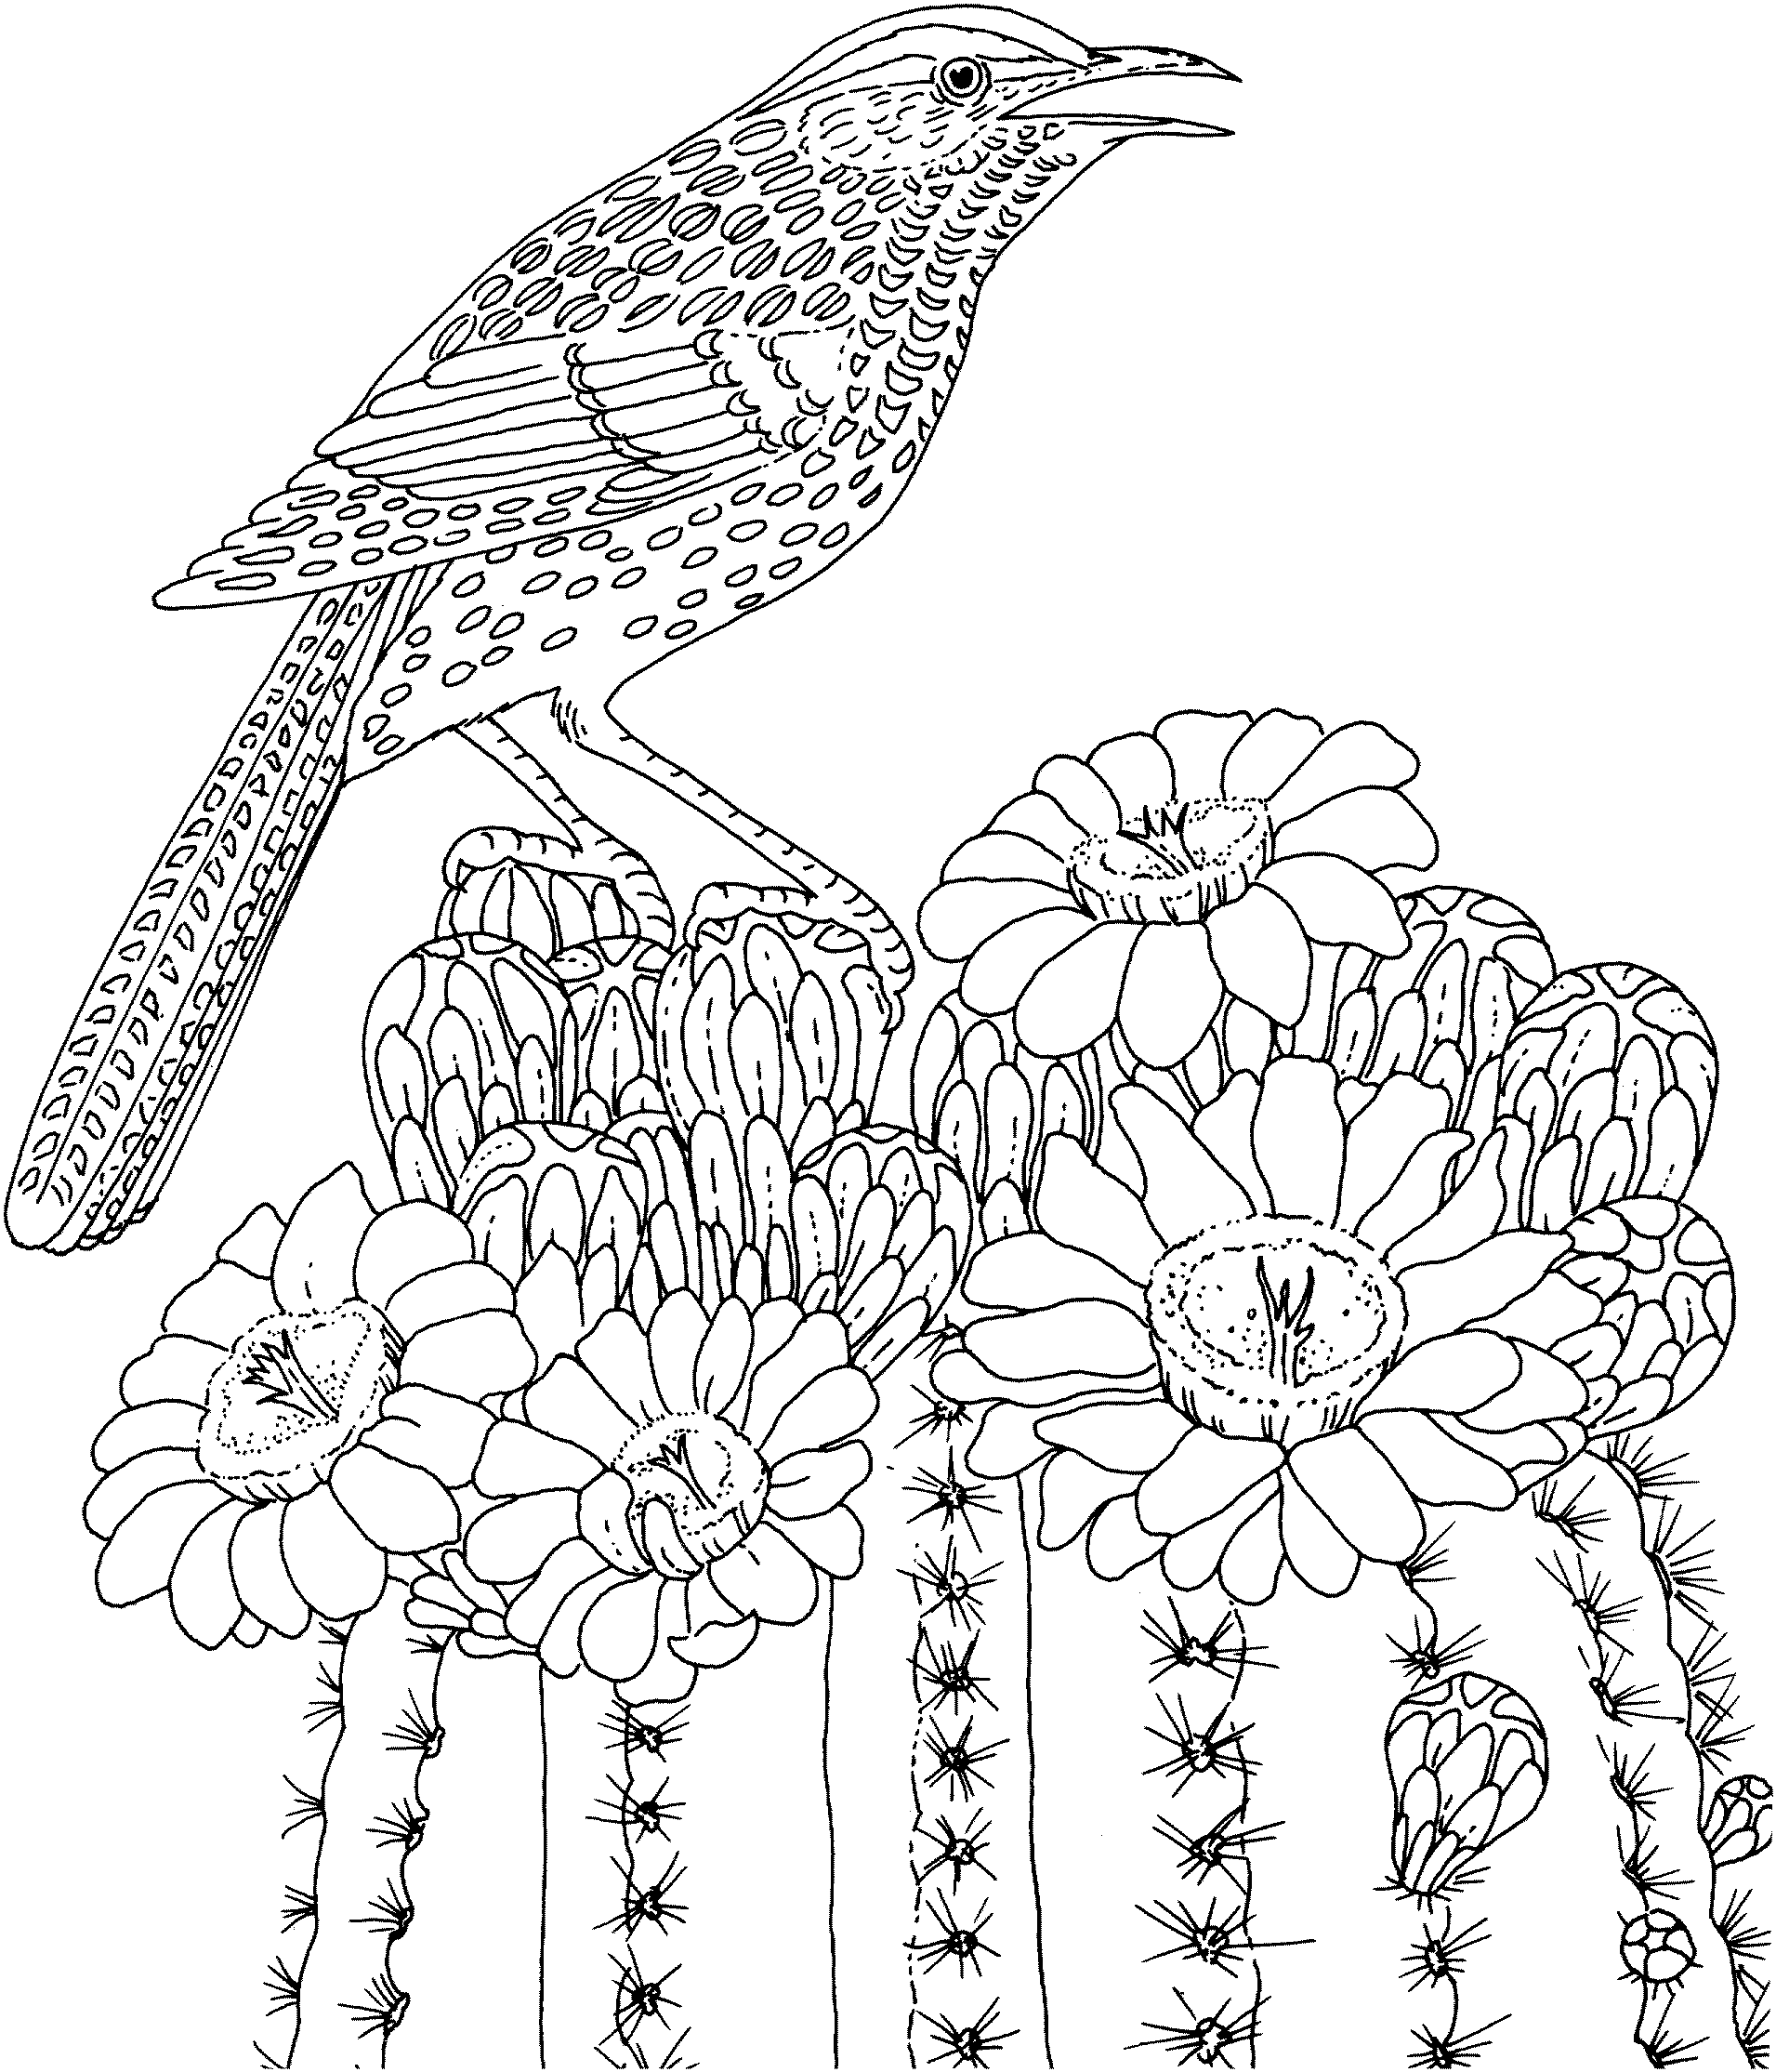  coloring pages for adults – printable coloring pages for adults – adult coloring pages – #14